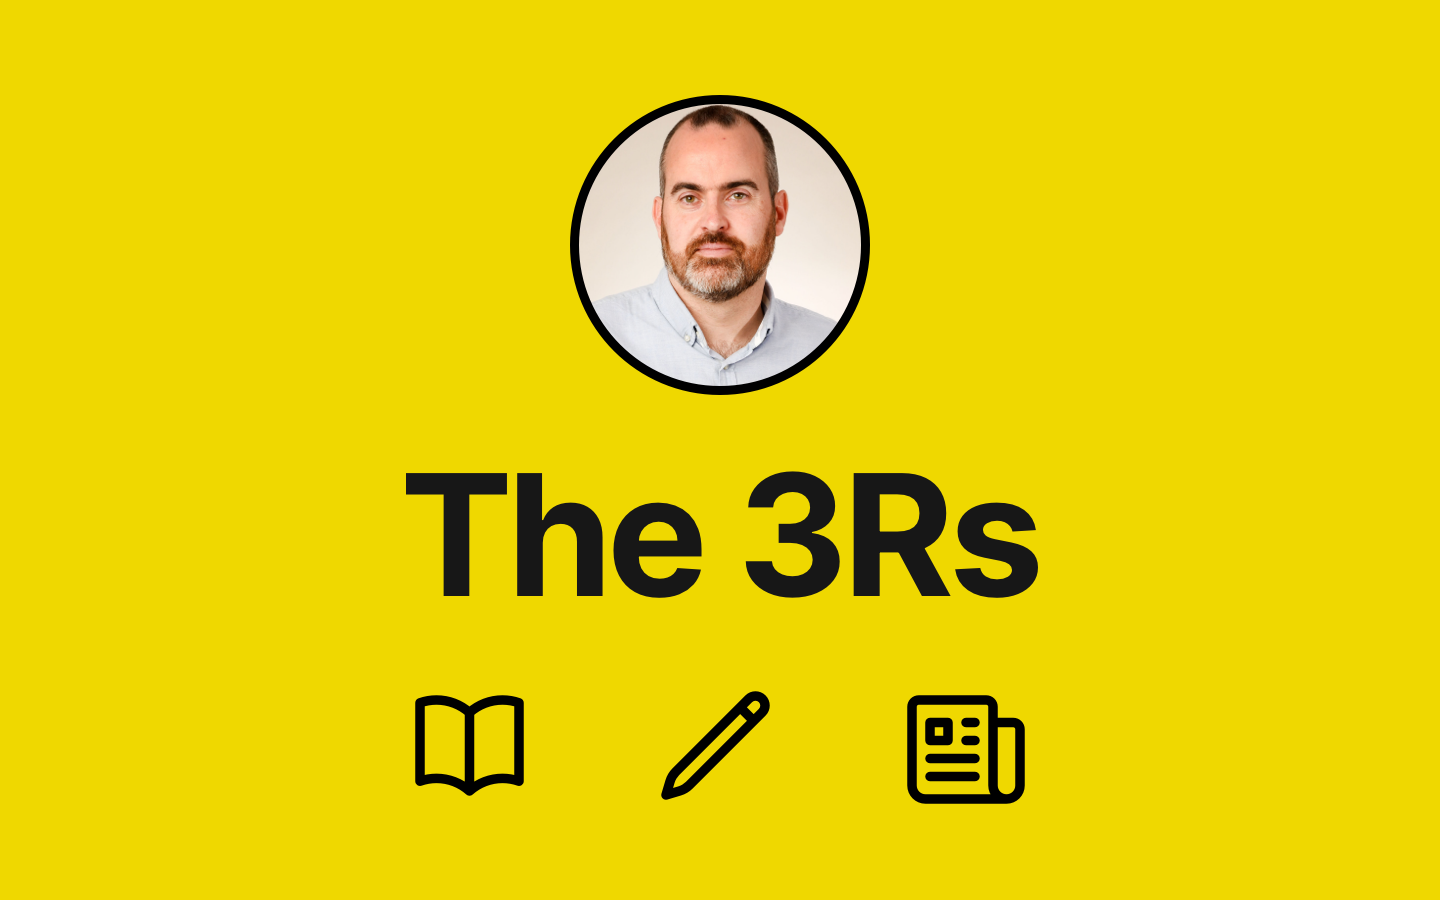 The 3Rs - Reading, w®iting, and research to be interested in #19 feature image